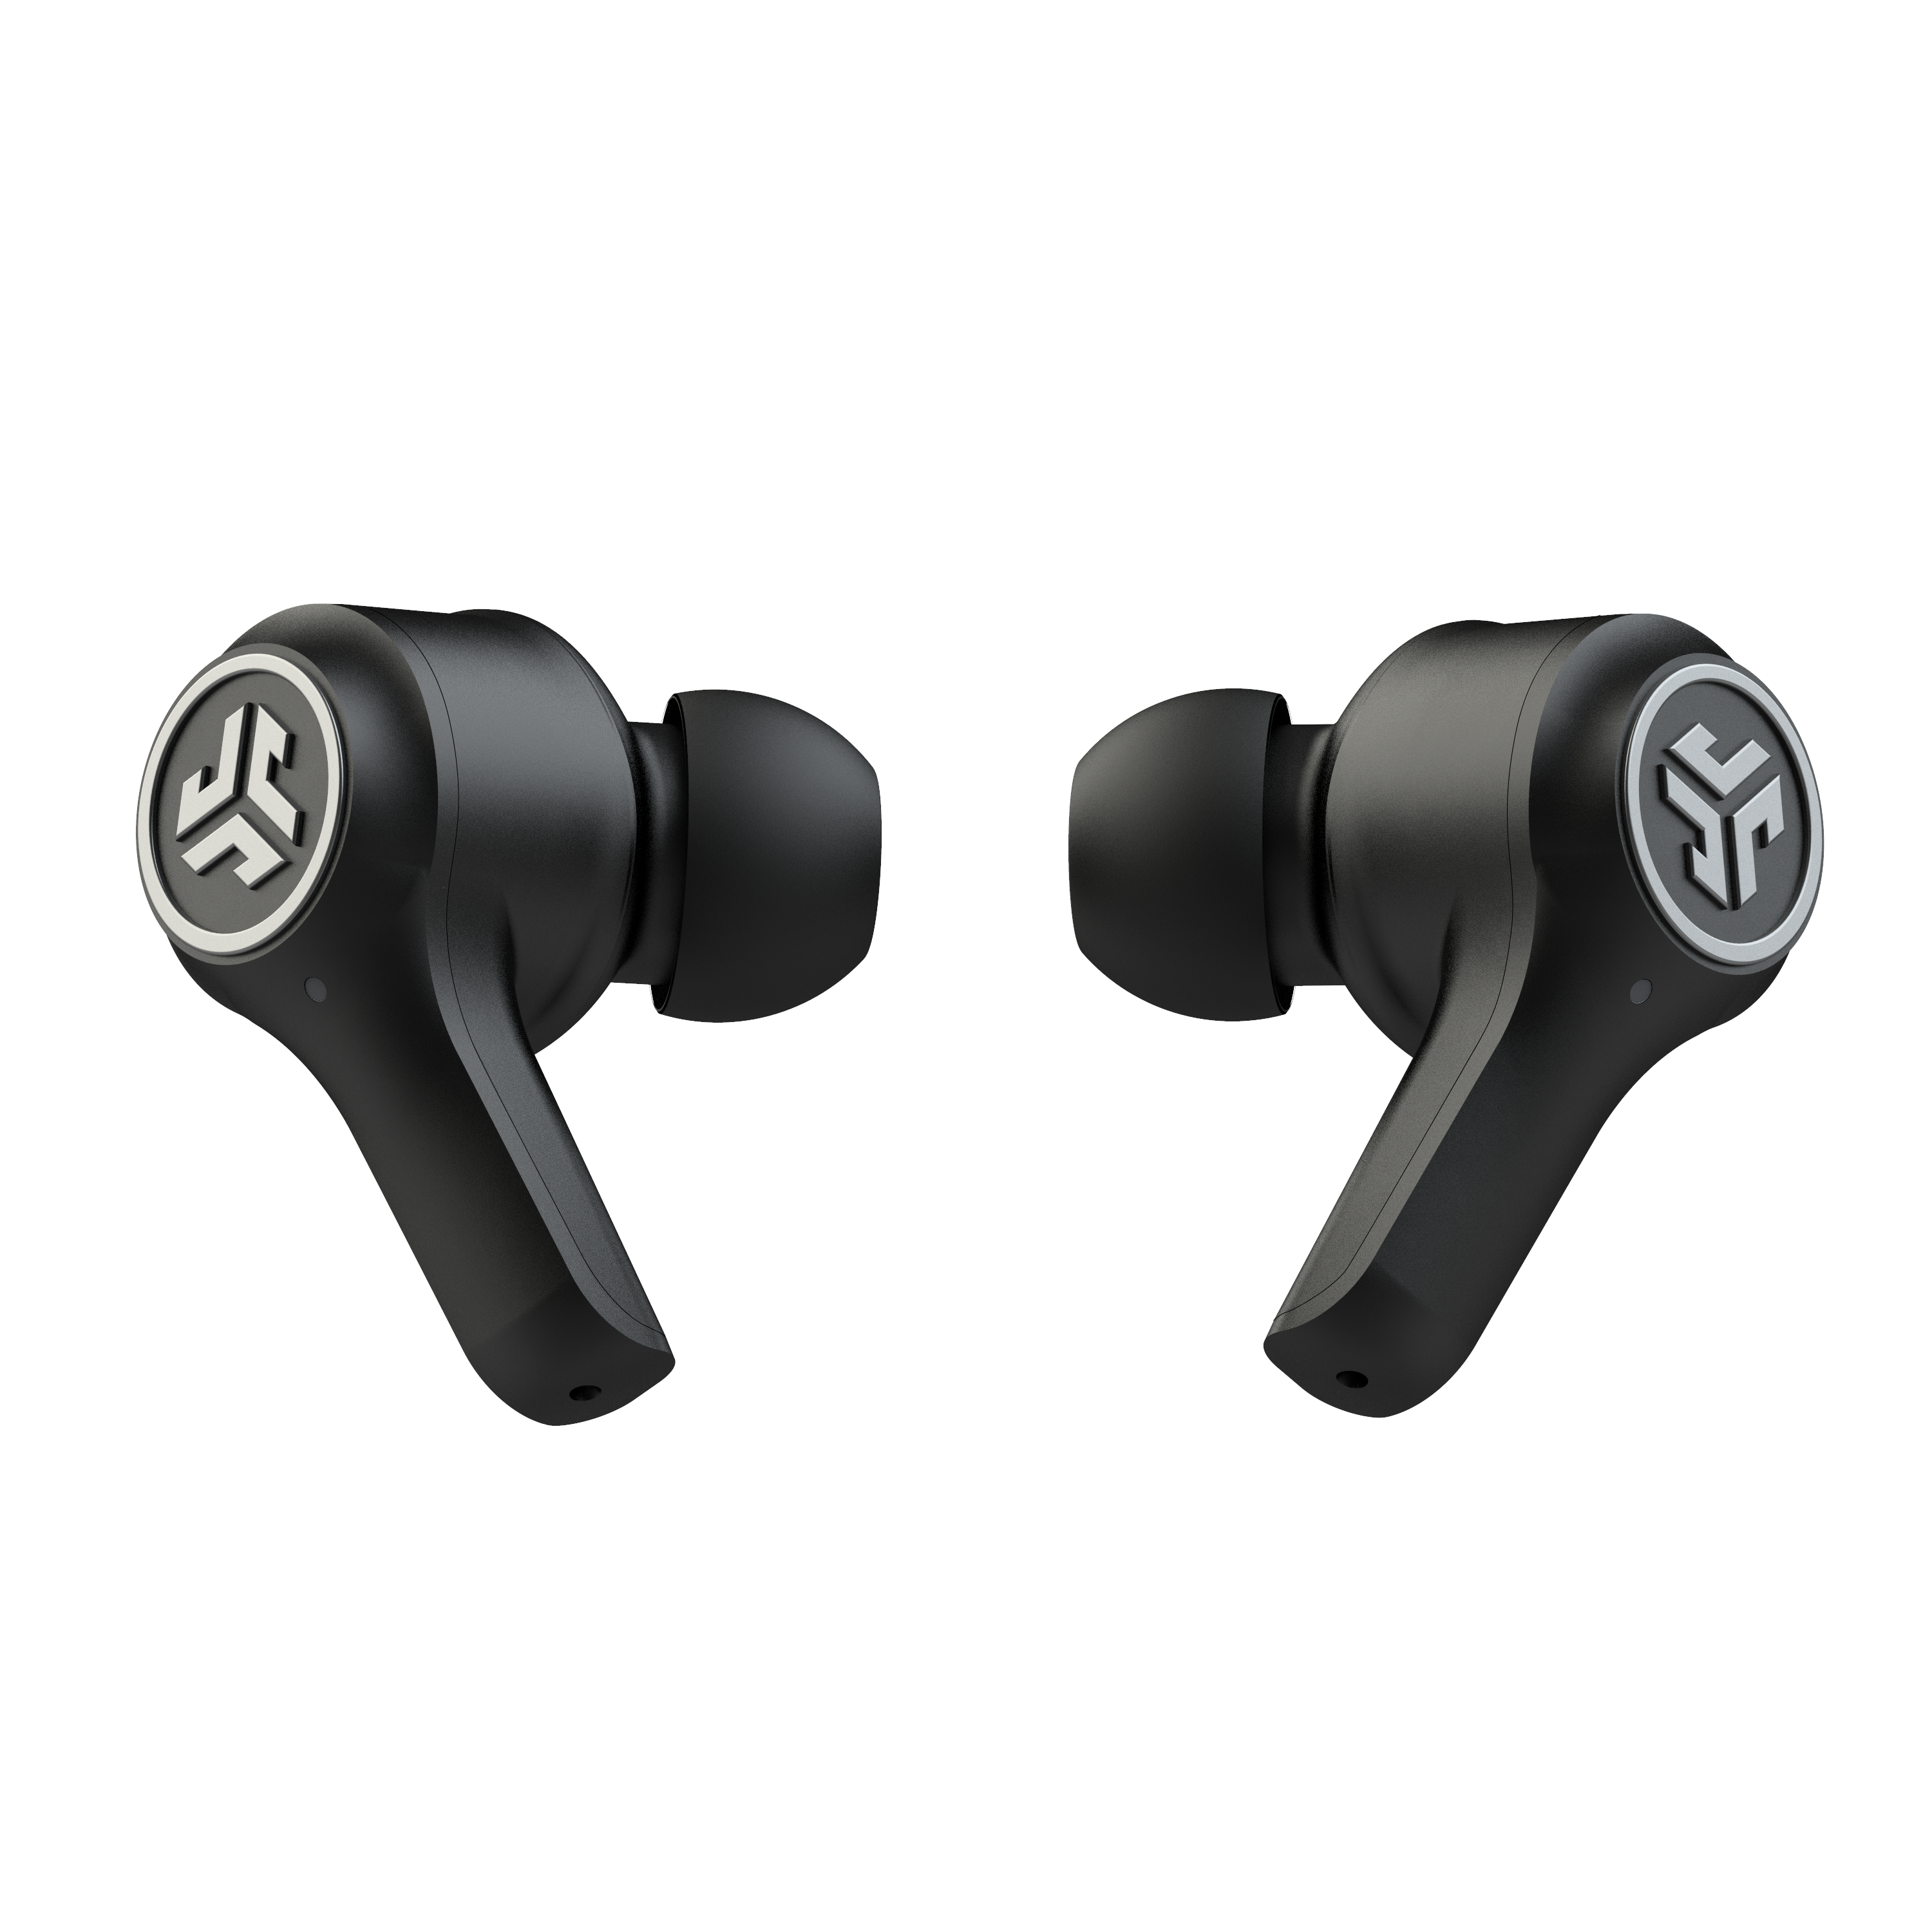 EPIC AIR ANC
TRUE WIRELESS EARBUDS